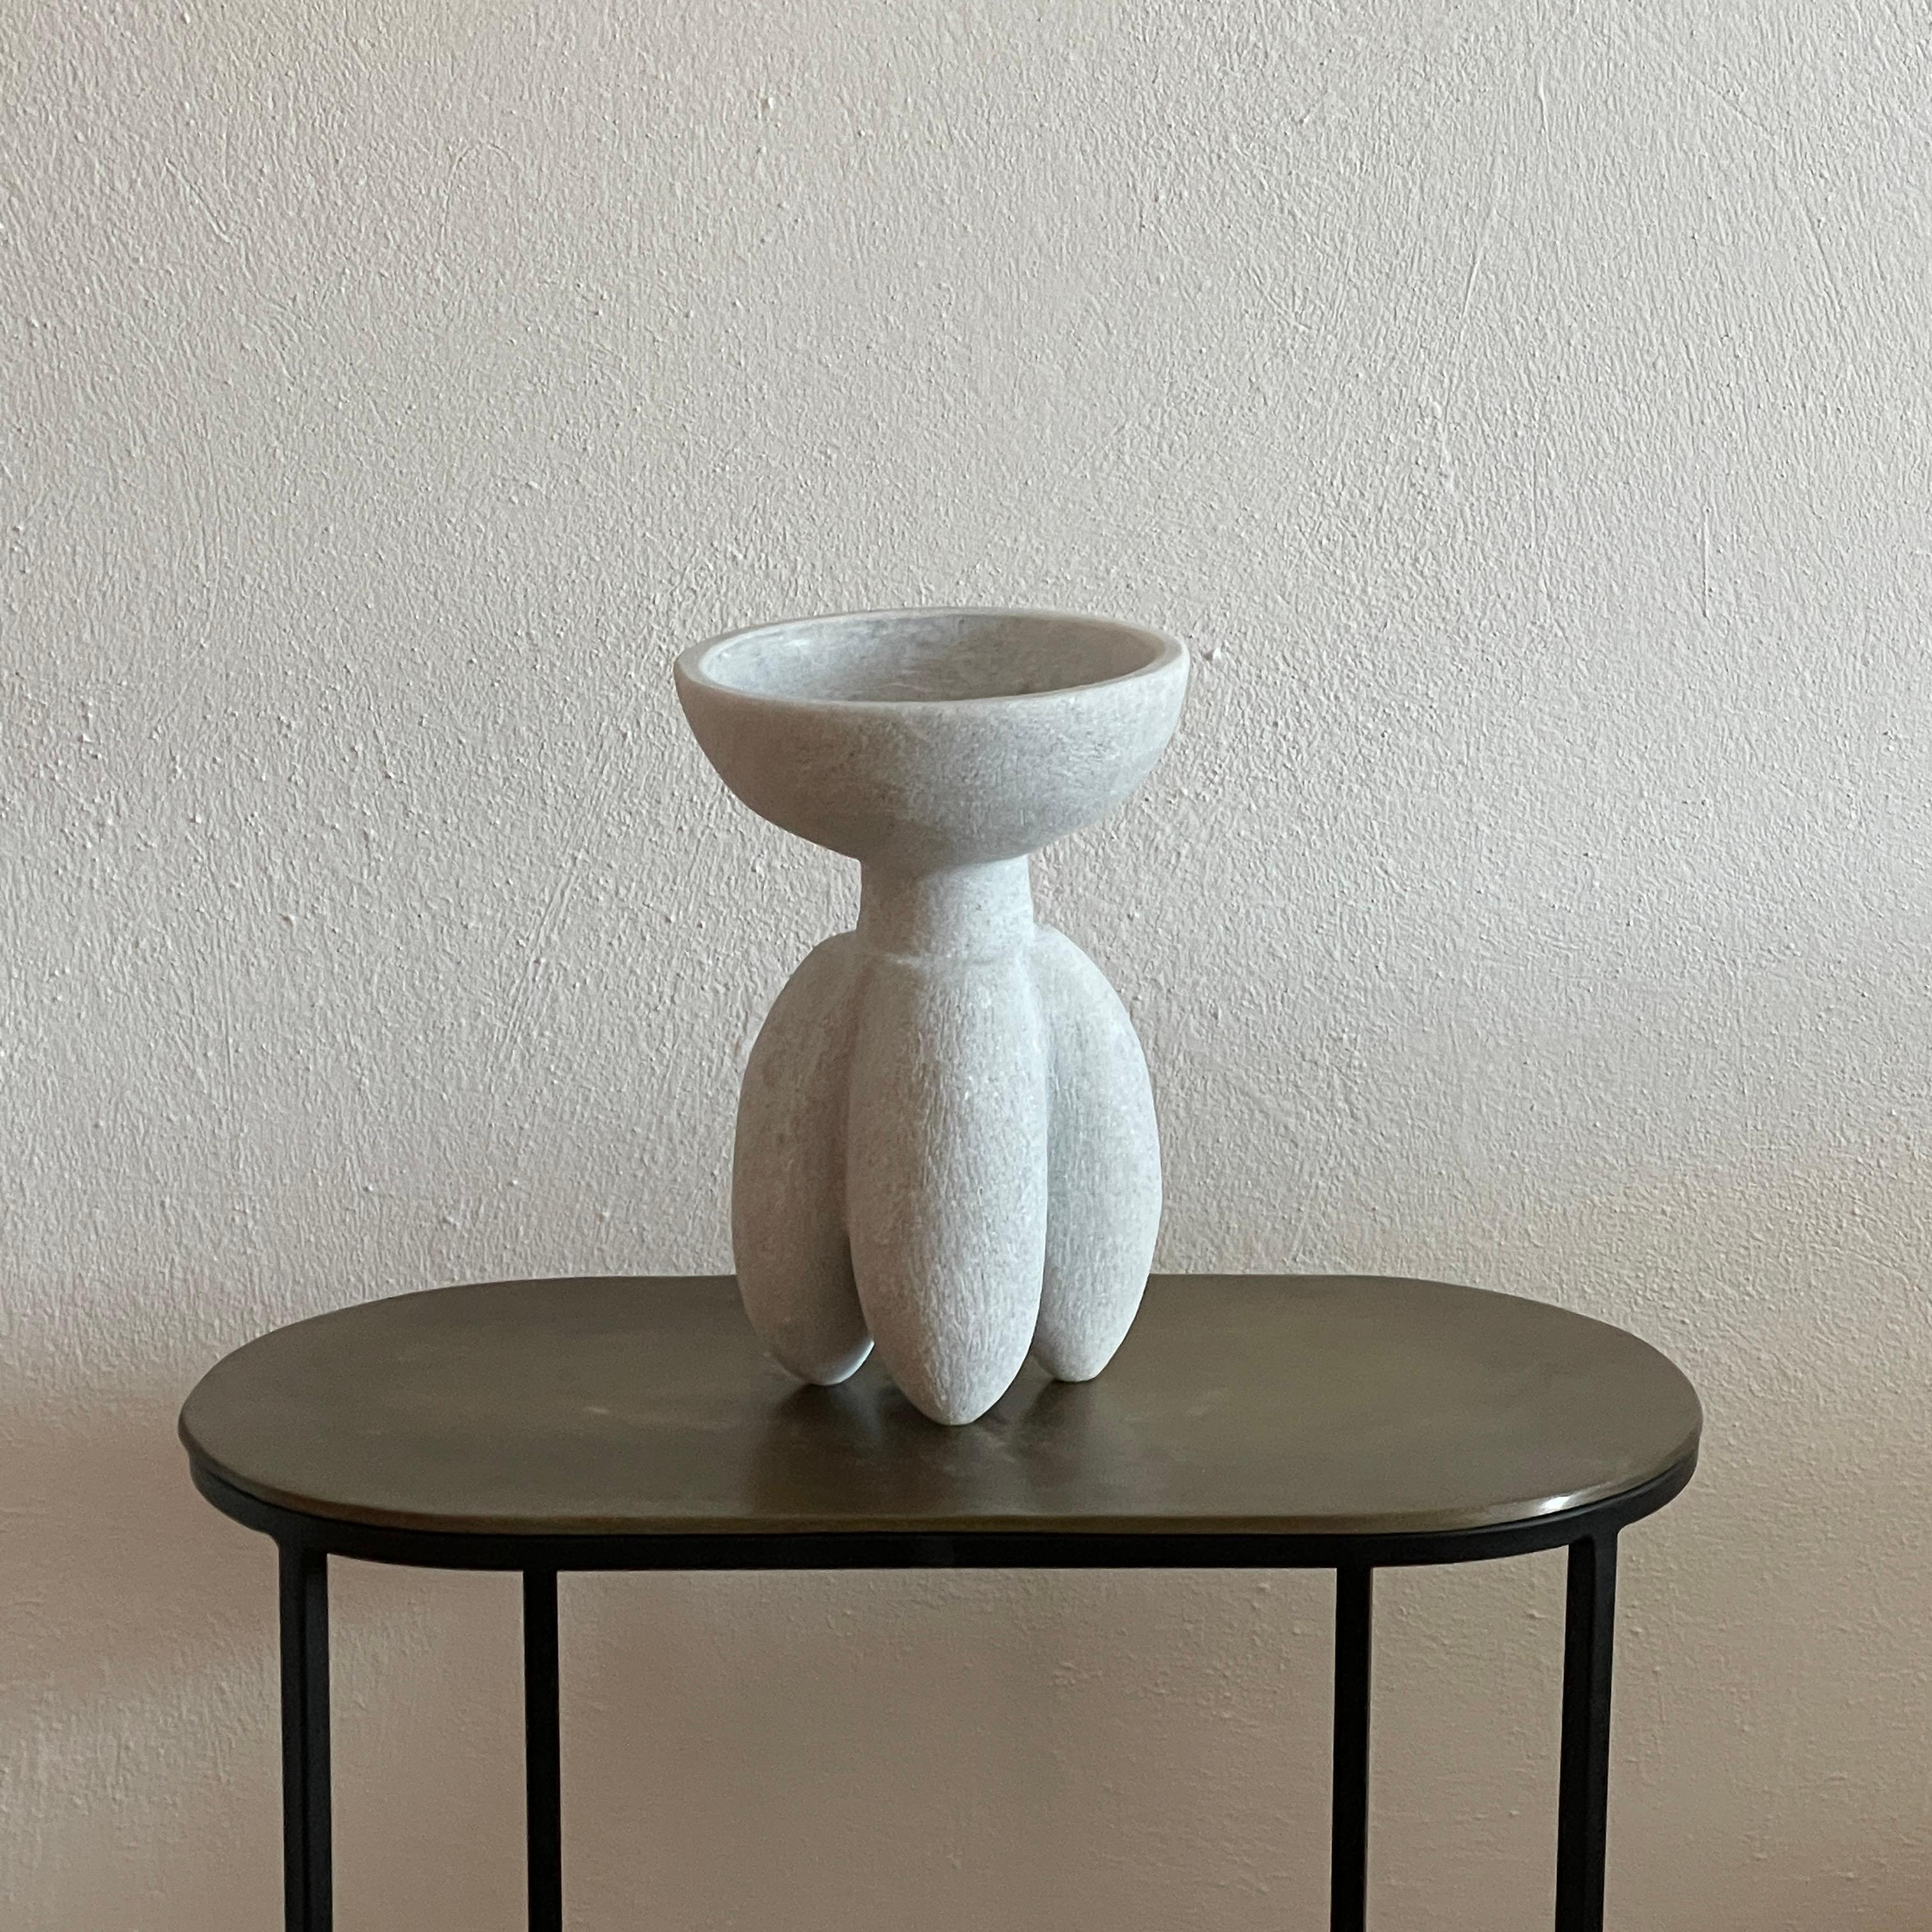 Hand carved marble vessel by Tom Von Kaenel
Materials: marble
Dimensions: W17 x D17 x H28 cm

Tom von Kaenel, sculptor and painter, was born in Switzerland in 1961. Already in his early
childhood he was deeply devoted to art. His desire to